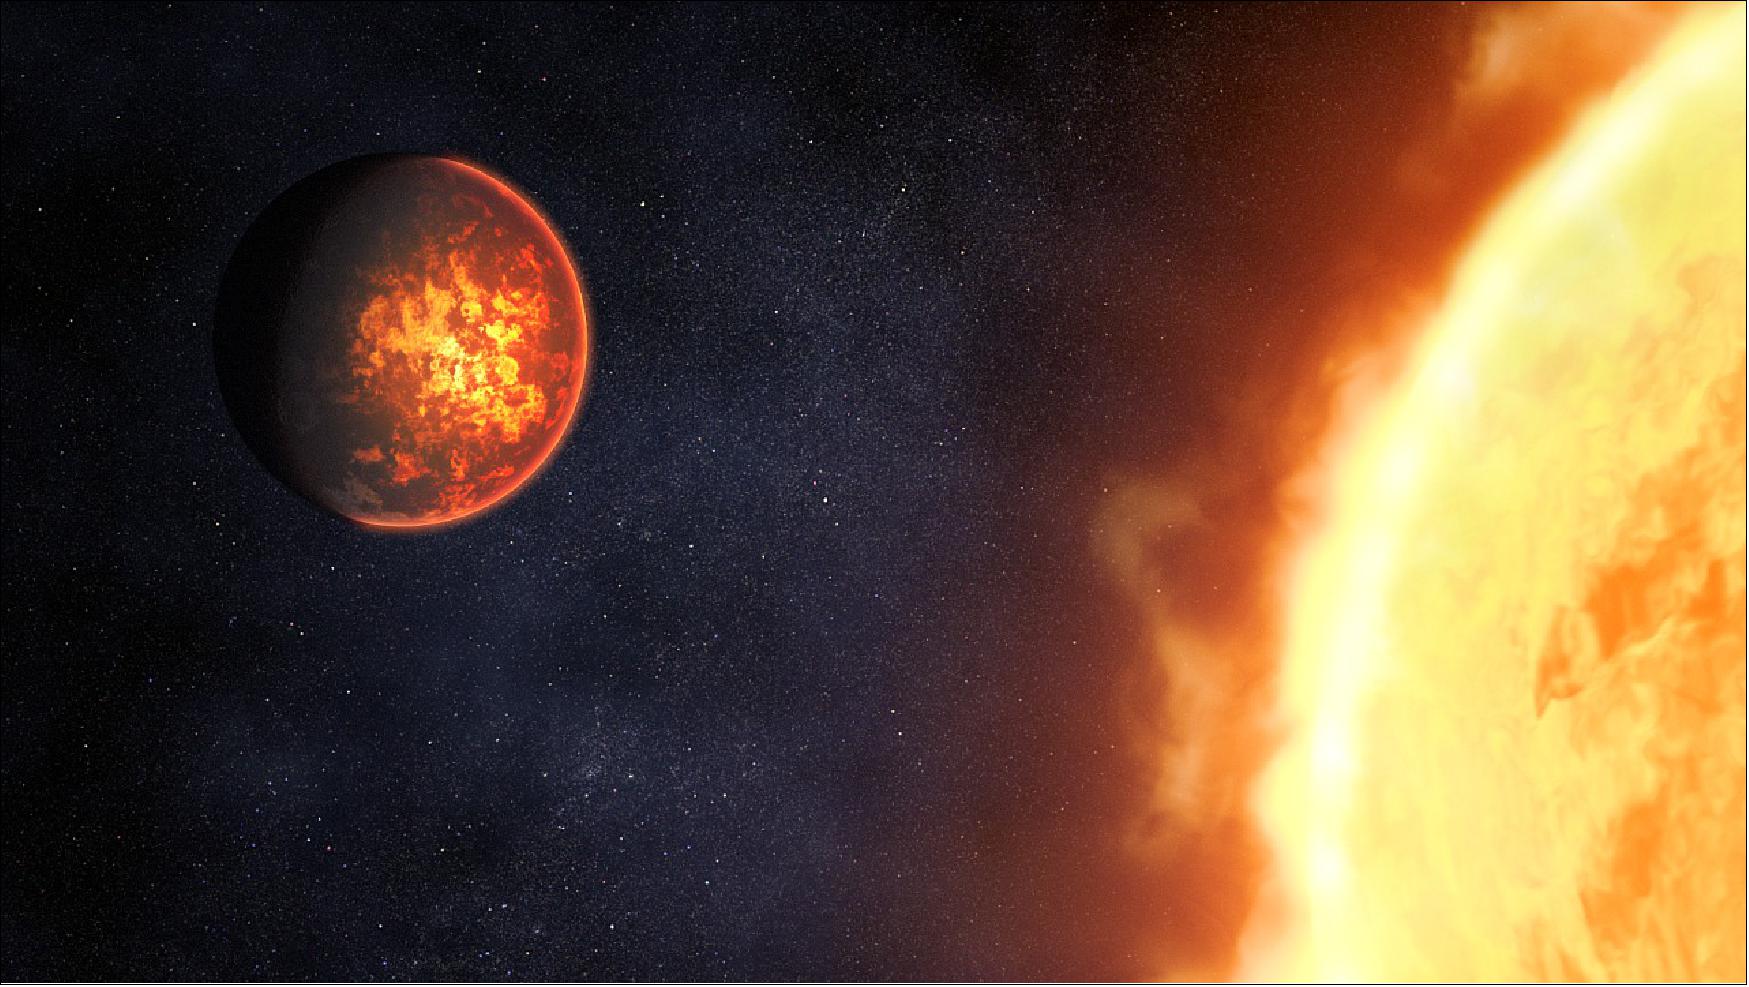 Figure 18: The illustration is showing what exoplanet 55 Cancri e could look like, based on current understanding of the planet. 55 Cancri e is a rocky planet with a diameter almost twice that of Earth orbiting just 0.015 astronomical units from its Sun-like star. Because of its tight orbit, the planet is extremely hot, with dayside temperatures reaching 4,400º Fahrenheit (about 2,400º Celsius). Although previous studies have ruled out a thick hydrogen, carbon dioxide, or water atmosphere, it is possible that the planet has a substantial atmosphere made of oxygen or nitrogen, or a very thin atmosphere of mineral vapor, such as silicon oxide. - Researchers think that if the planet is tidally locked, the lit surface must be permanently molten. If the planet is not locked, it would experience day-night cycles, with the surface heating up and melting during the day, and cooling and solidifying at night. The extreme heat during the day would also cause some of the molten rock to vaporize, forming a very tenuous mineral vapor atmosphere. In the evening, this vapor would condense and fall as a rain of lava back onto the surface, where it would turn solid overnight. - Spectroscopic observations using Webb's Near-Infrared Camera (NIRCam) and Mid-Infrared Instrument (MIRI) will help determine whether or not the planet has an atmosphere, and if so, what that atmosphere is made of. The observations will also help determine whether or not the planet is tidally locked [image credit: ARTWORK: NASA, ESA, CSA, Dani Player (STScI)]